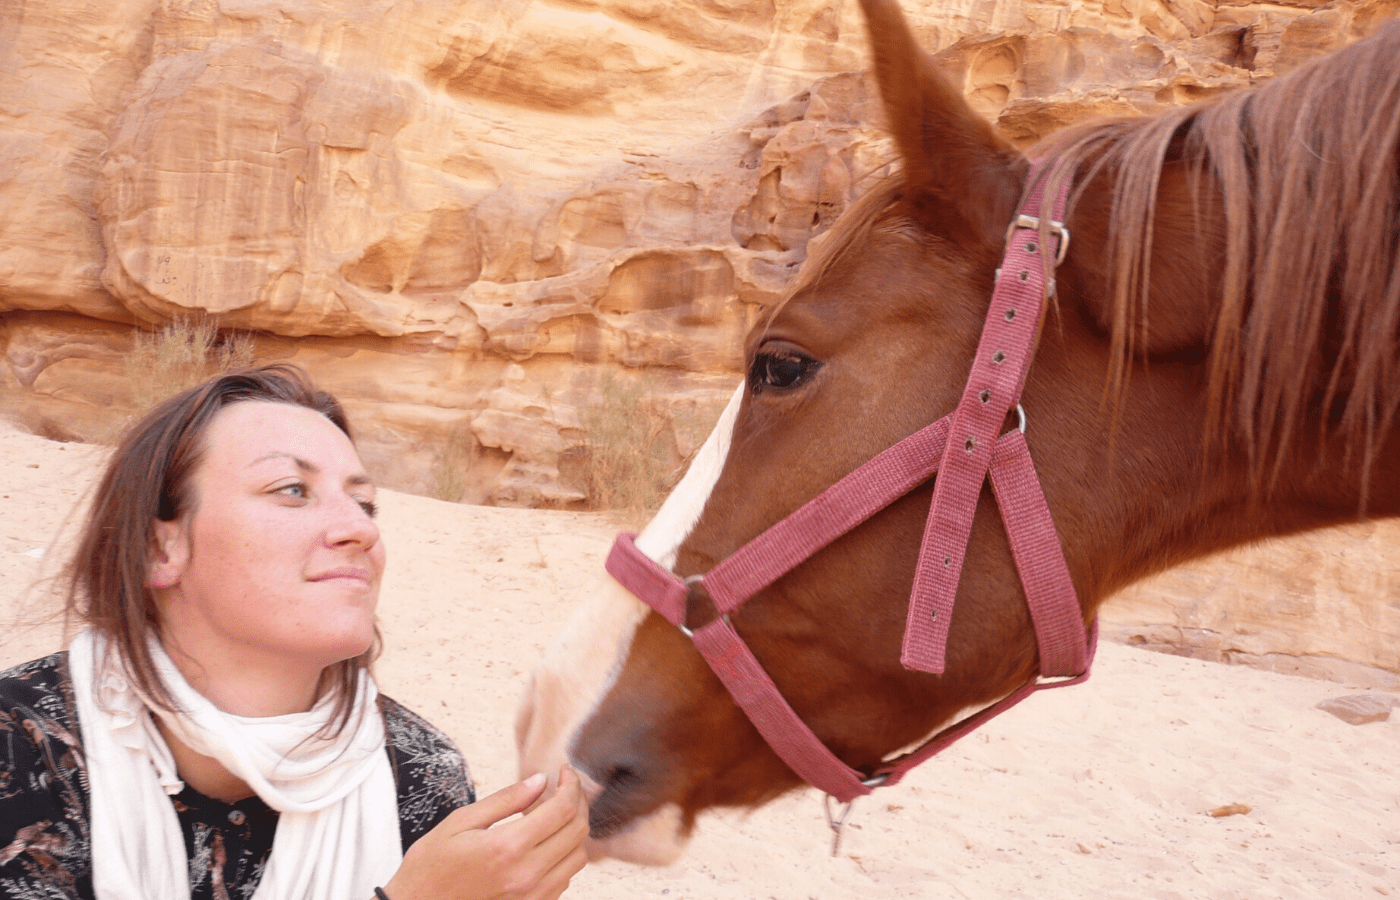 Connection with animals in the desert of Wadi Rum, Jordan